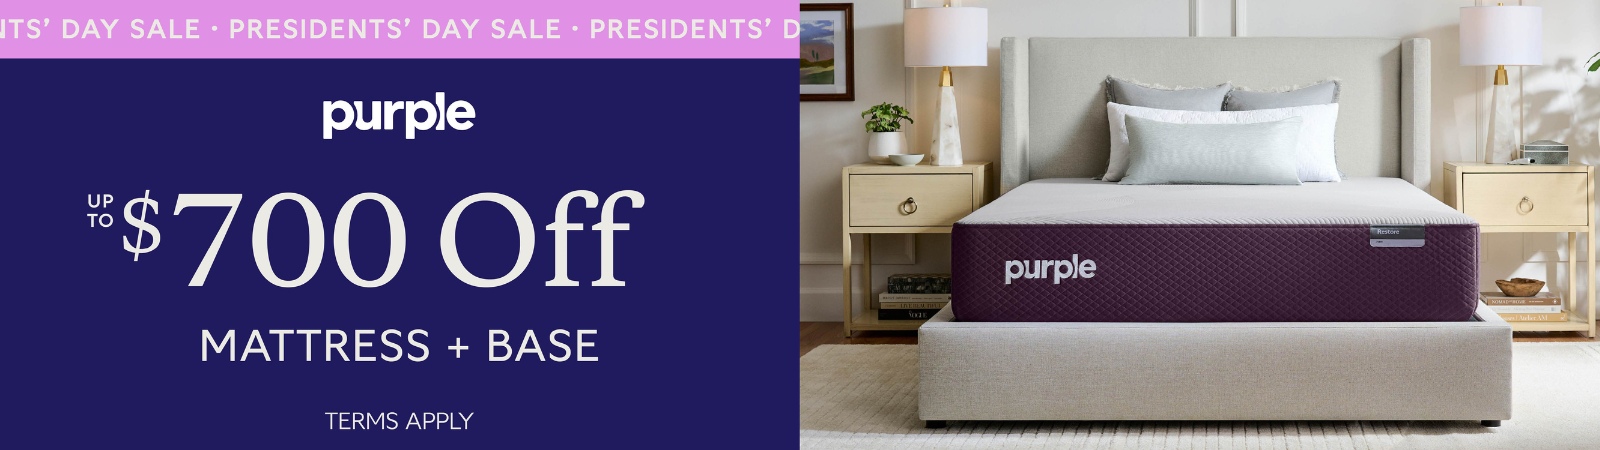 SAVE on PURPLE this President's Day!